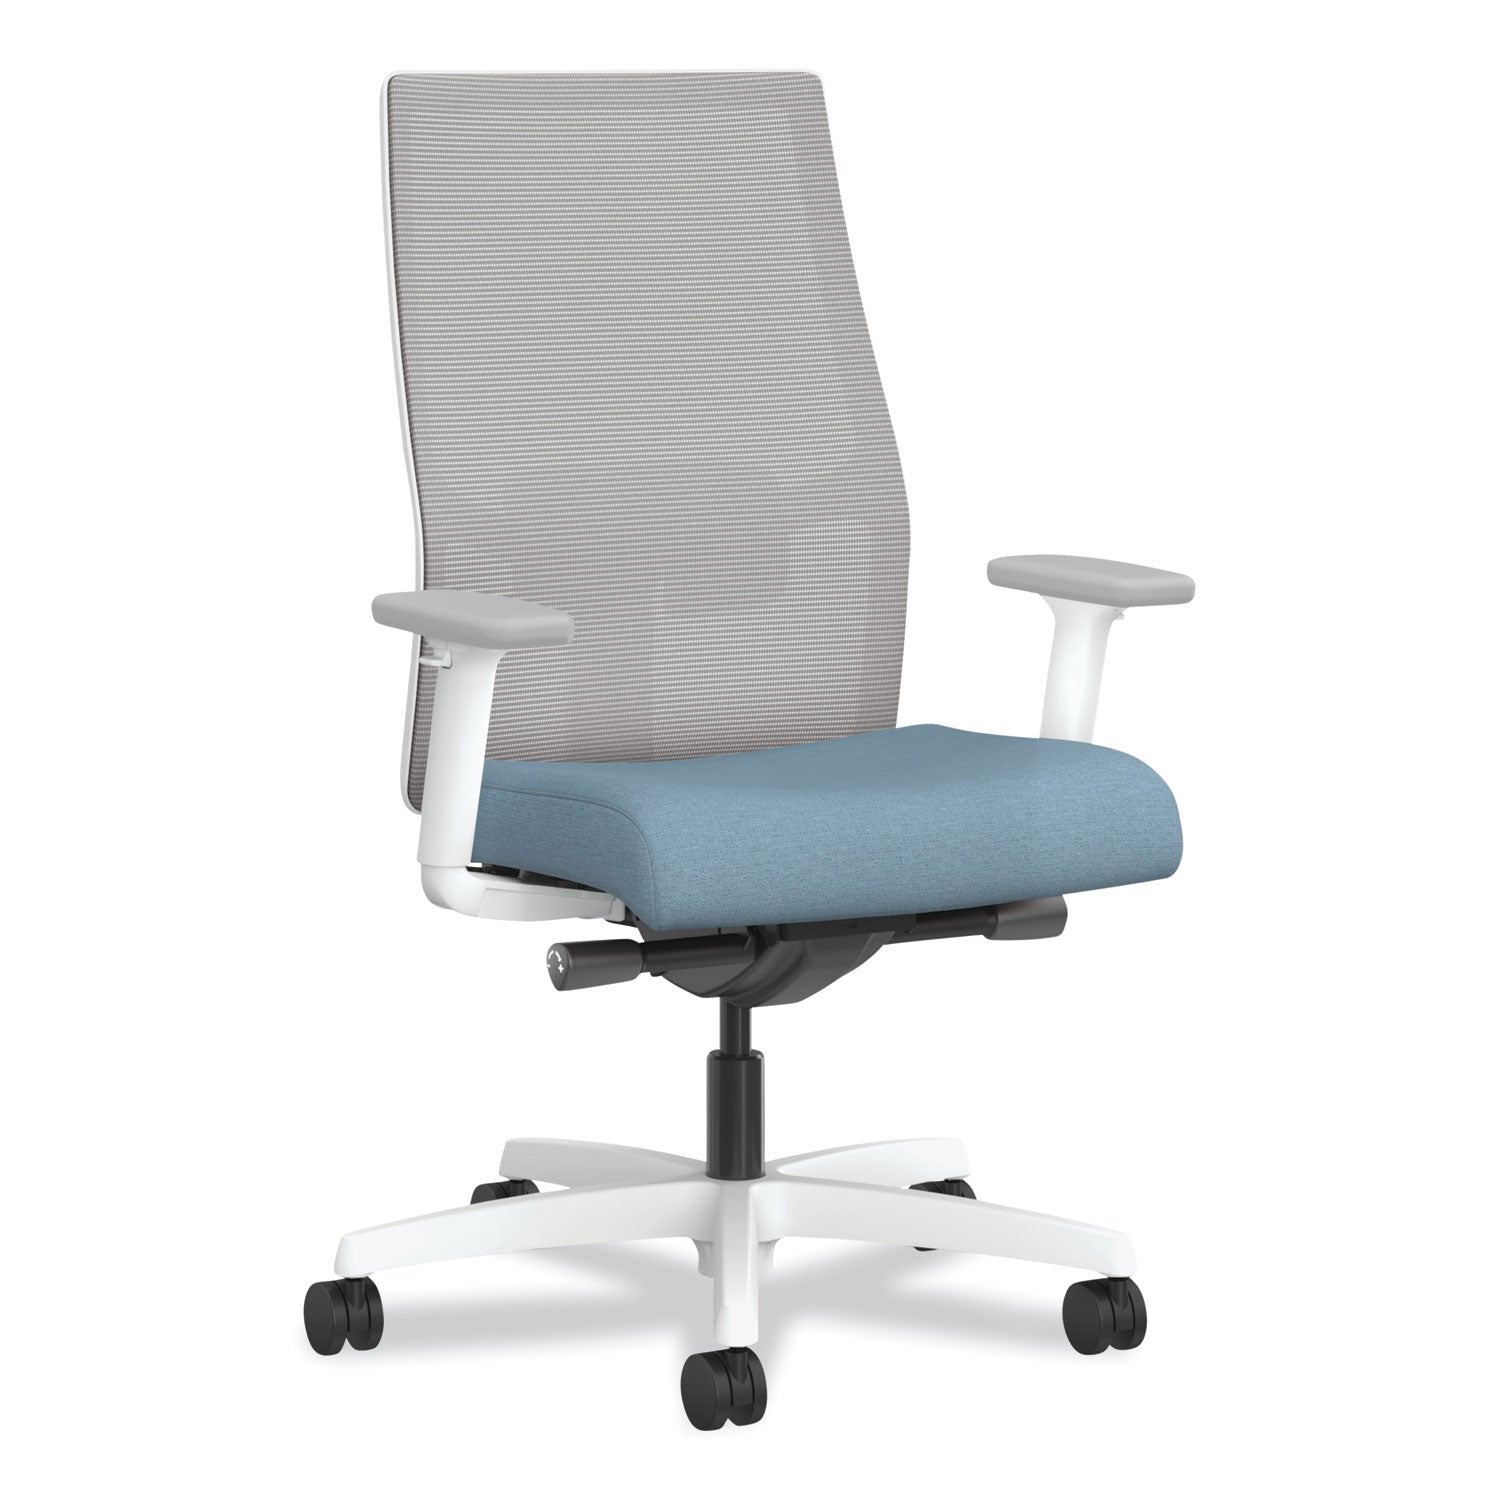 ignition-20-4-way-stretch-mid-back-mesh-task-chair-white-lumbar-support-carolina-fog-white-ships-in-7-10-business-days_honi2mm2afh21wx - 1